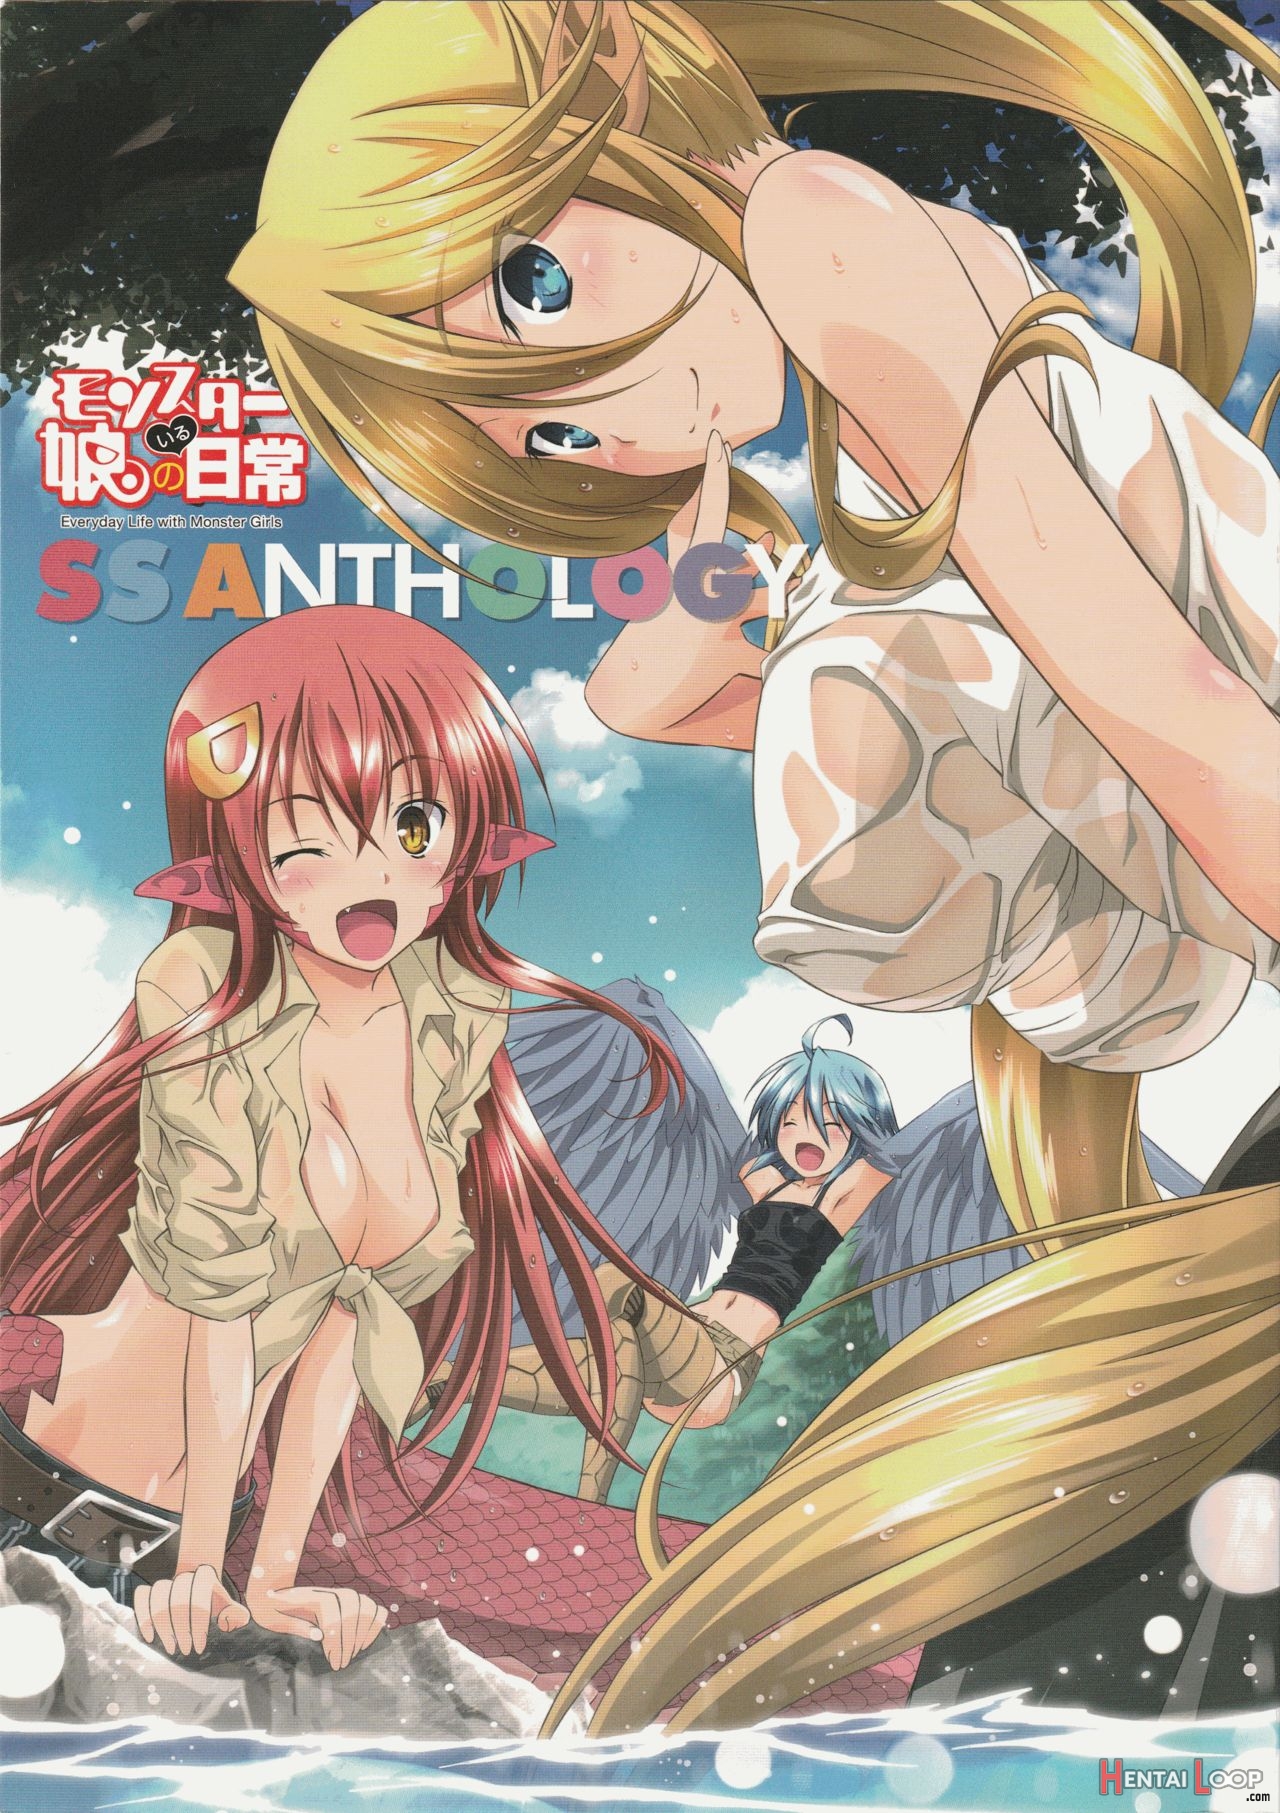 Monster Musume No Iru Nichijou Ss Anthology - Everyday Life With Monster Girls page 1